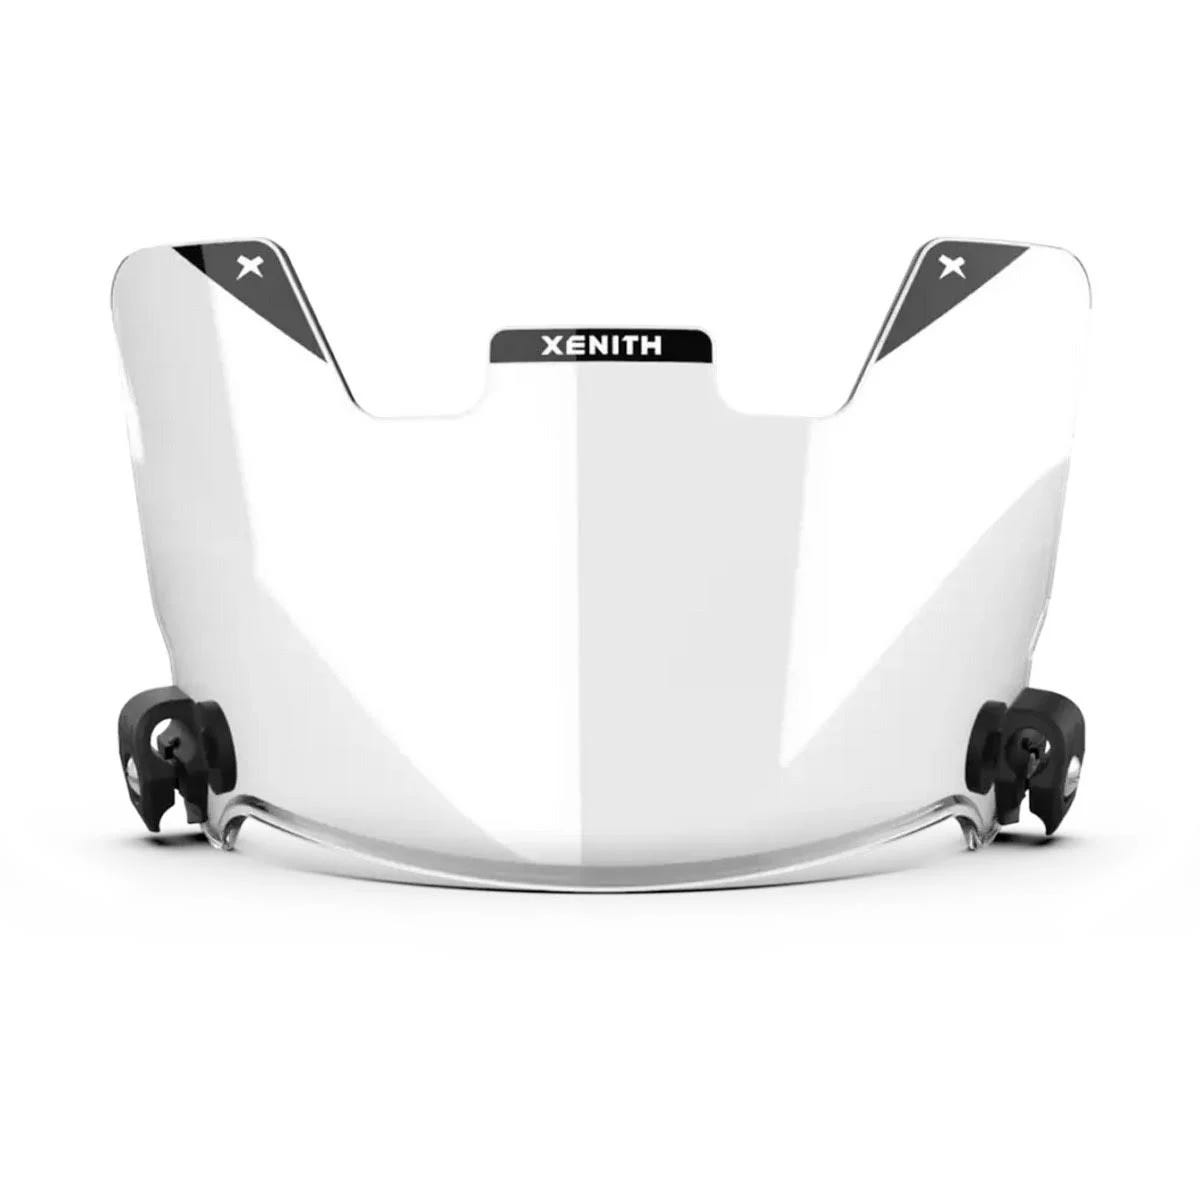 Xenith Shatter Resistant Football Visor with Fog-Resistant Coating | Image